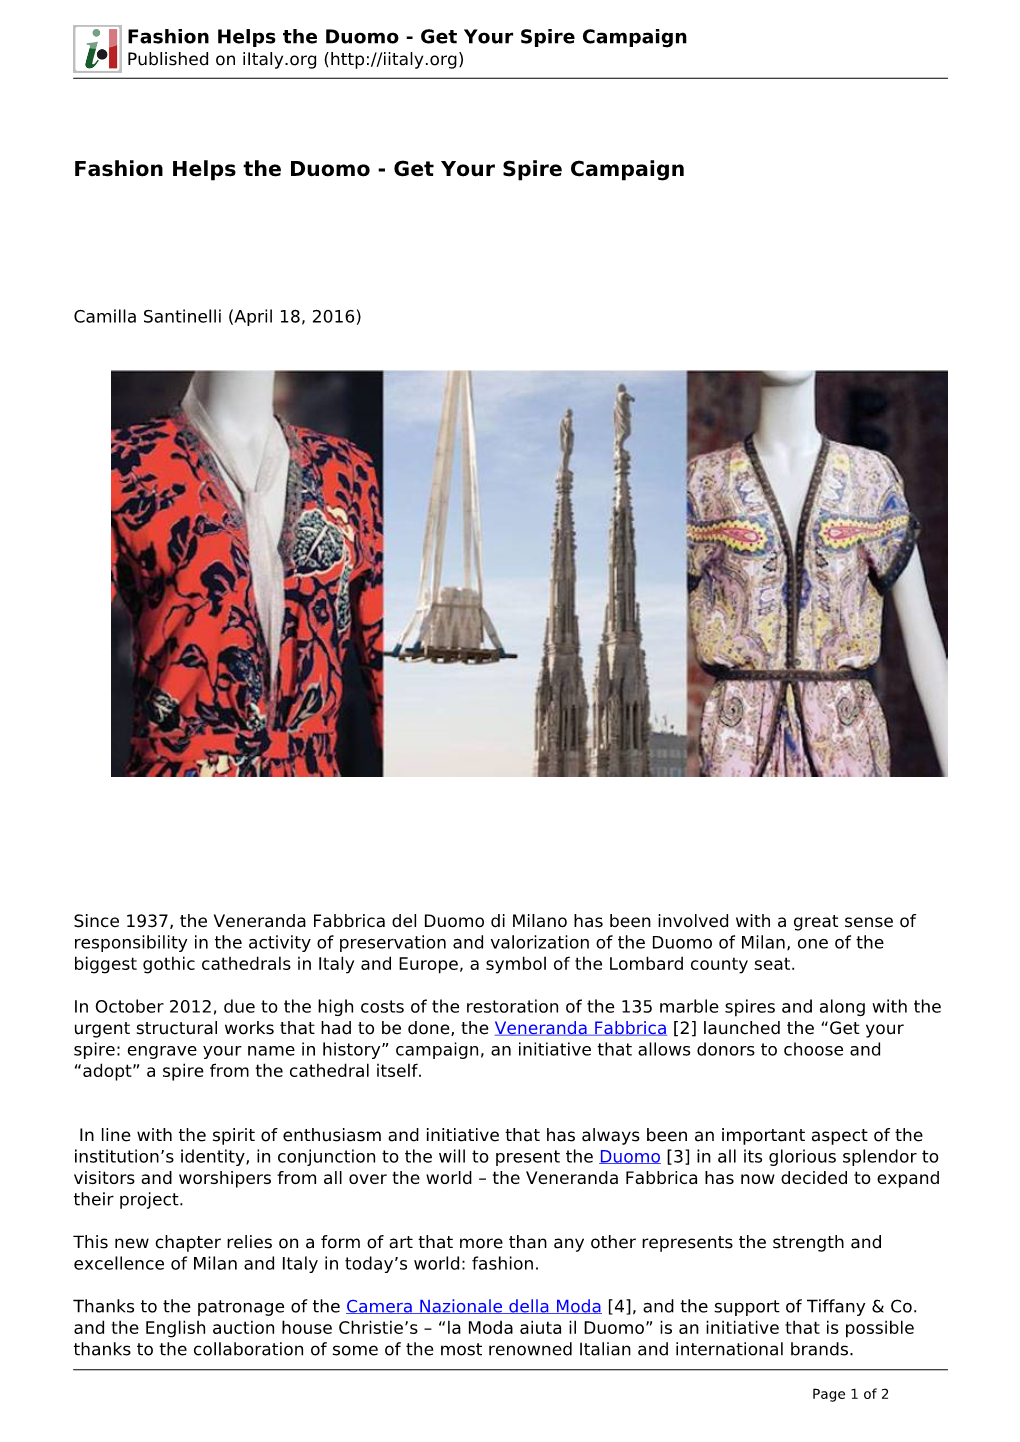 Fashion Helps the Duomo - Get Your Spire Campaign Published on Iitaly.Org (